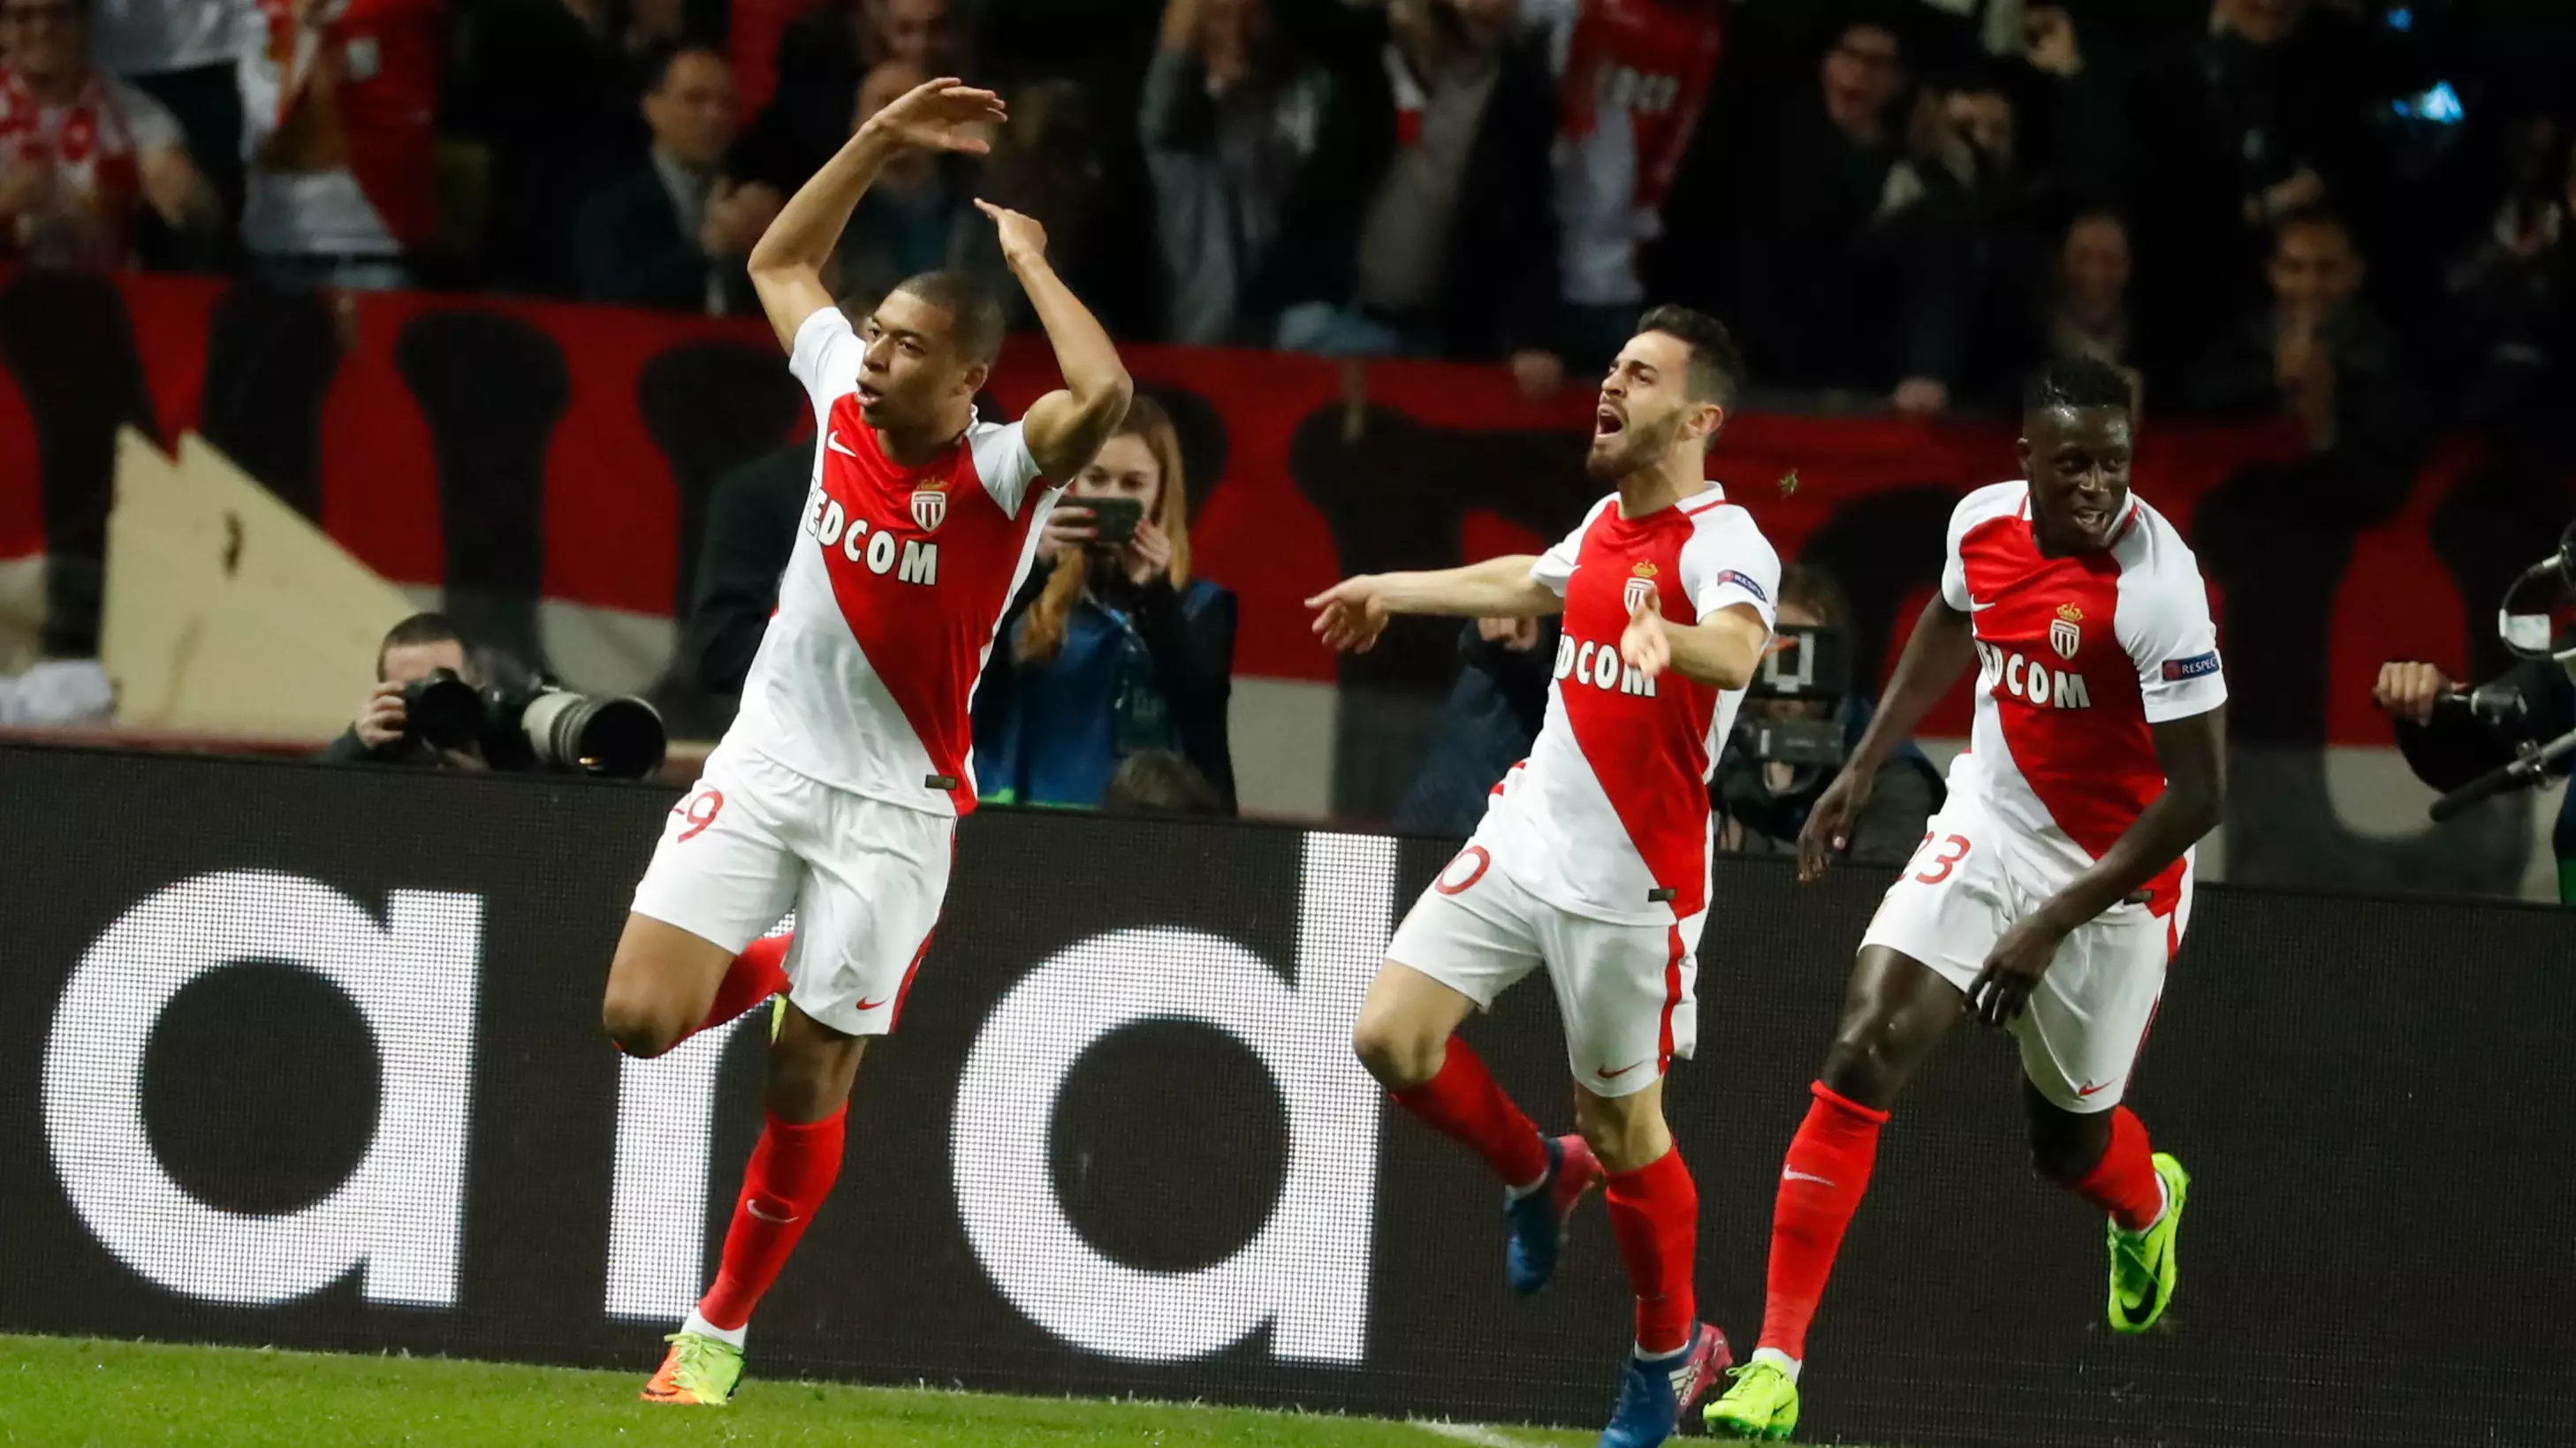 Monaco Ousted As Europe's Top Five Leagues Goal Scorers